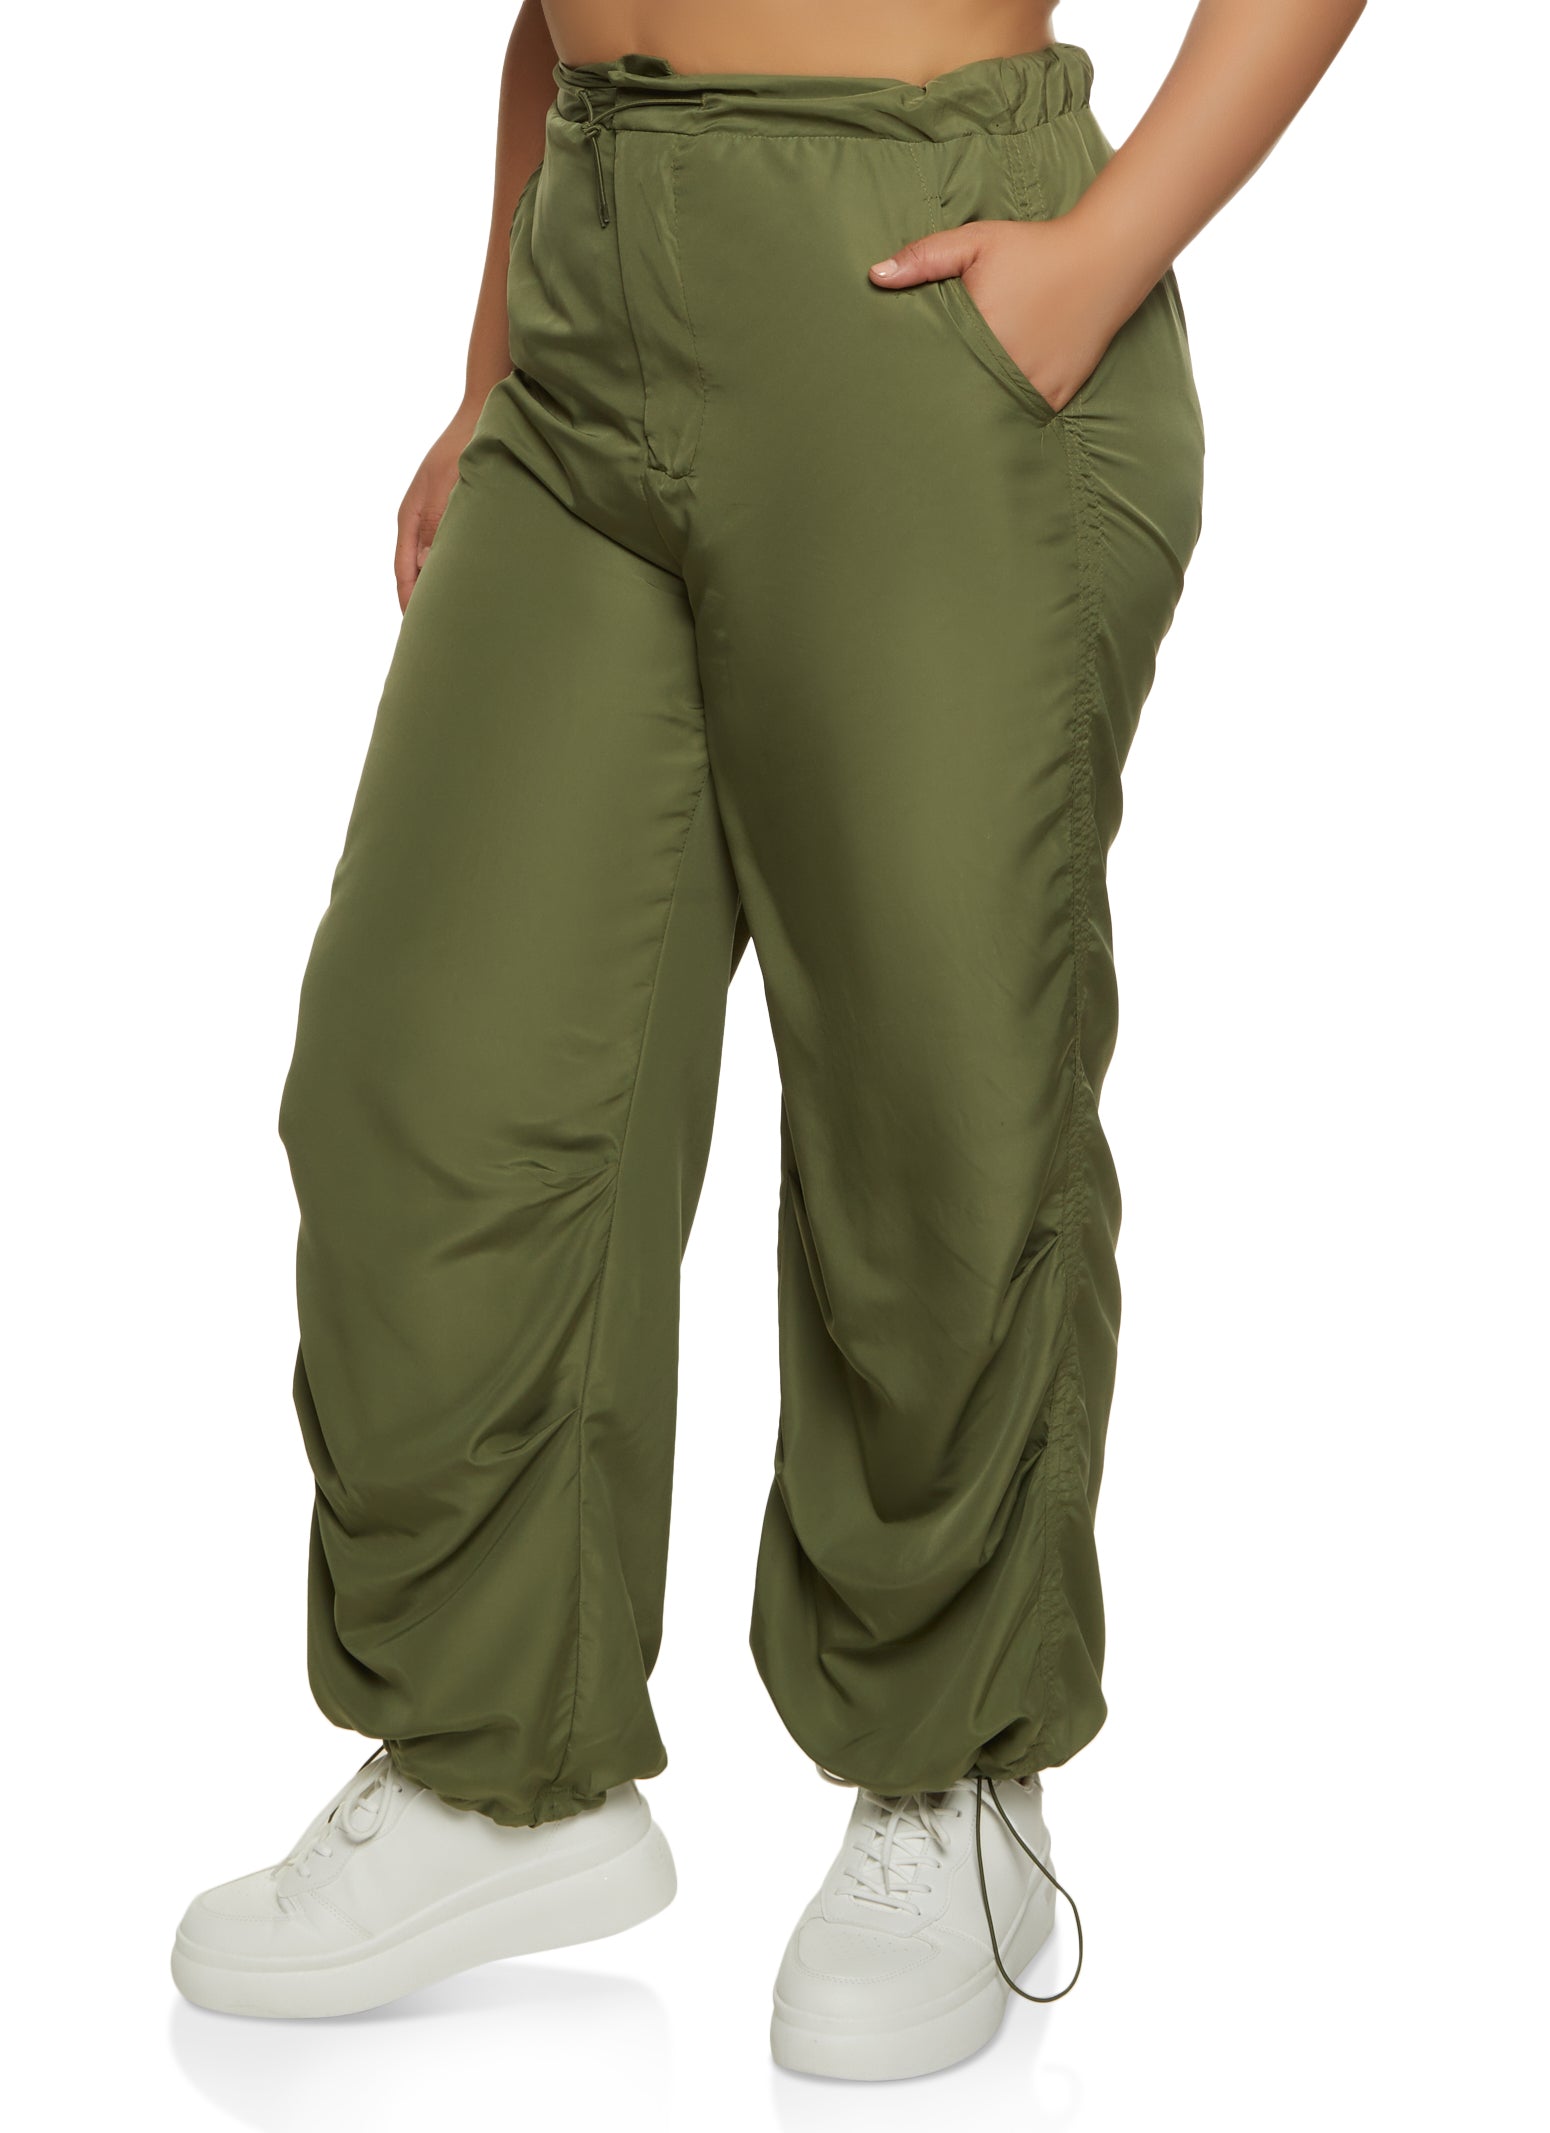 Pants & Trousers, Faux Leather, leggings, Cargo and Parachute pants for  Women